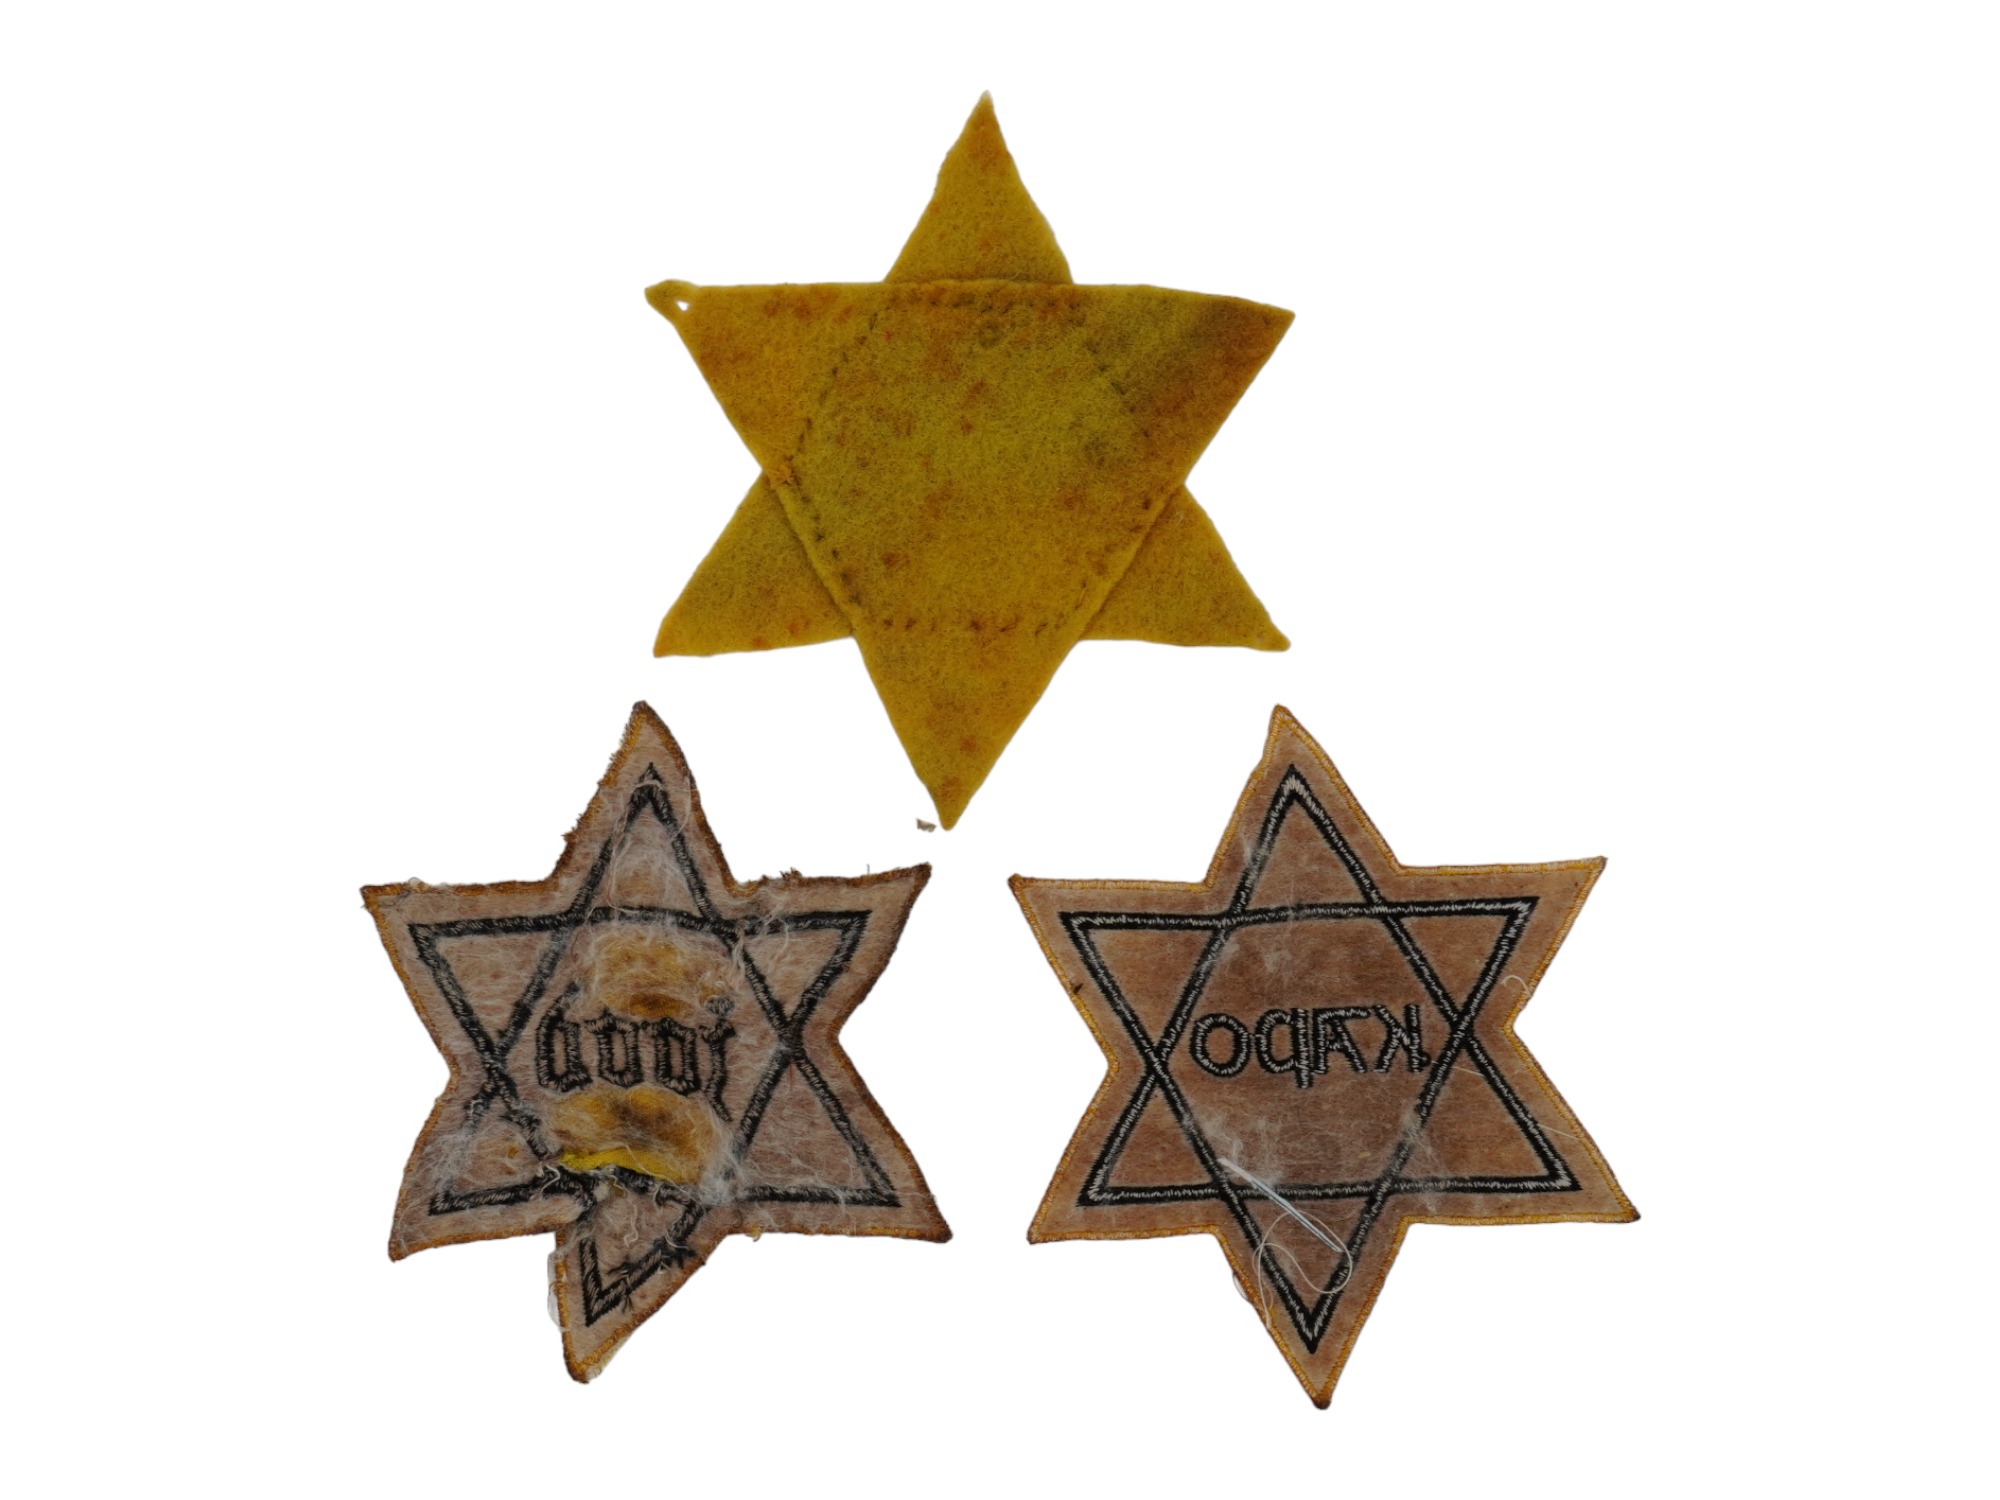 GROUP OF 3 HOLOCAUST PERIOD STARS OF DAVID ARMBANDS PIC-1